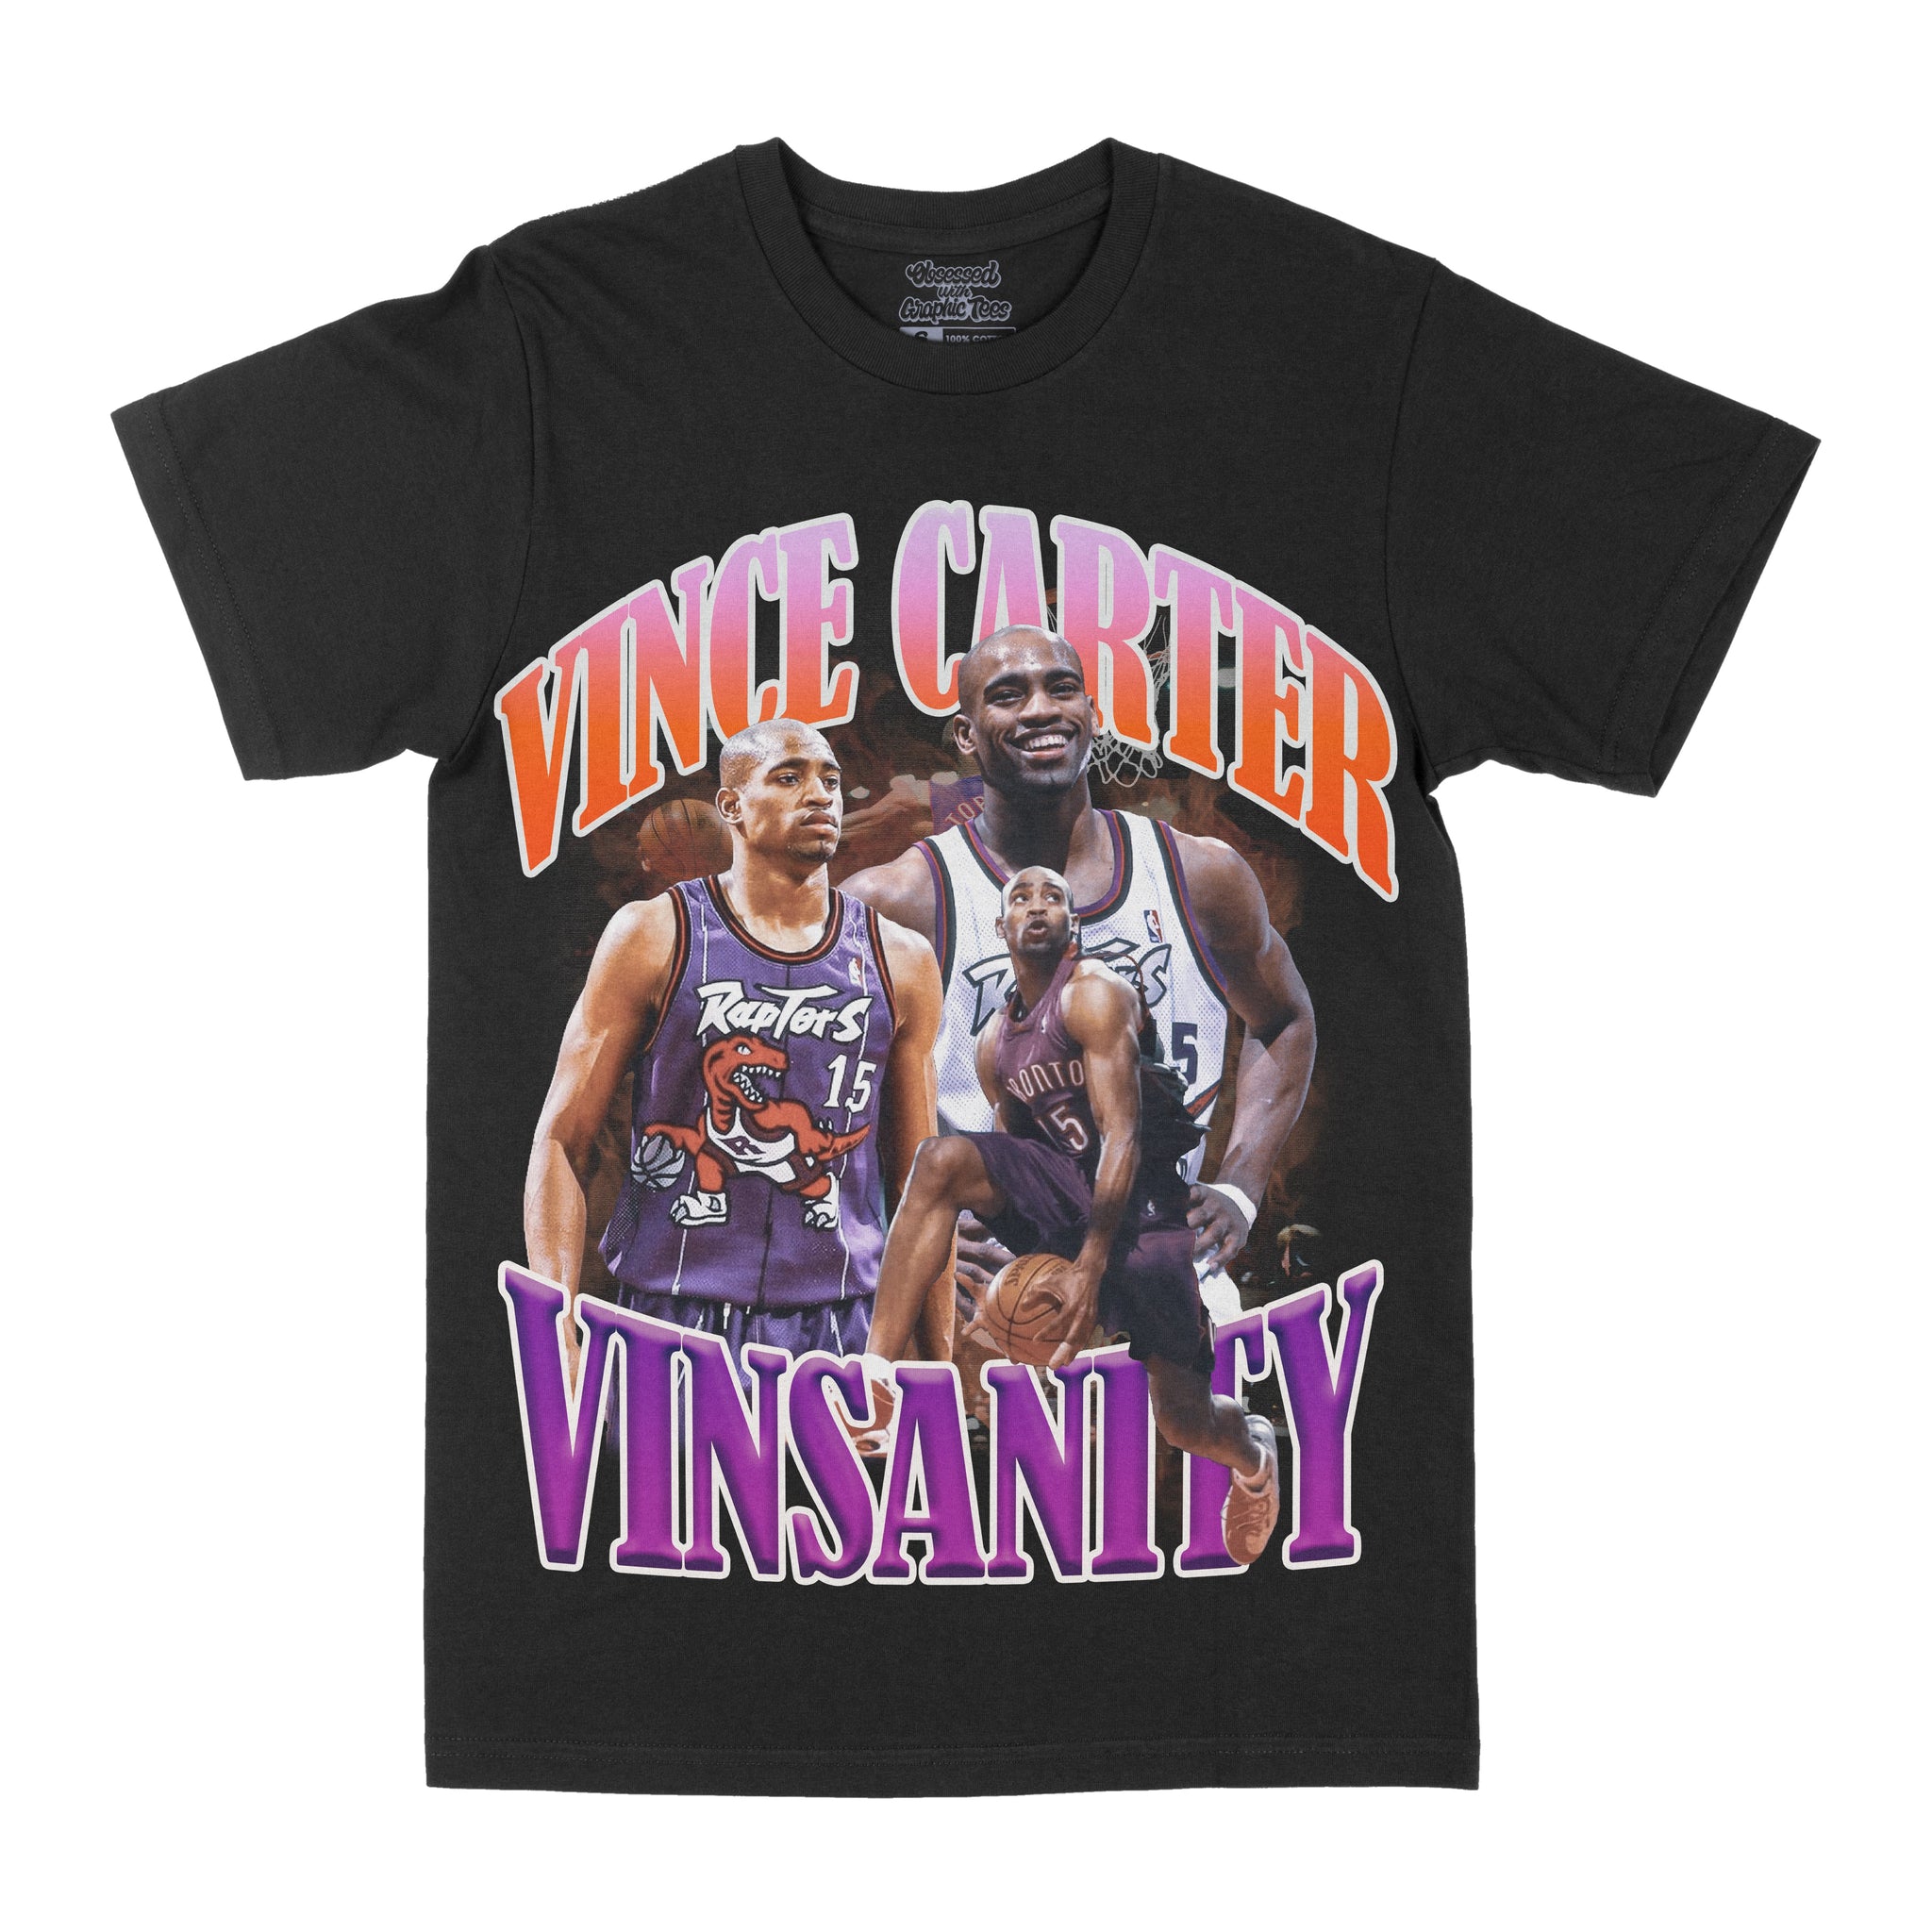 Vince Carter "Vinsanity" Graphic Tee